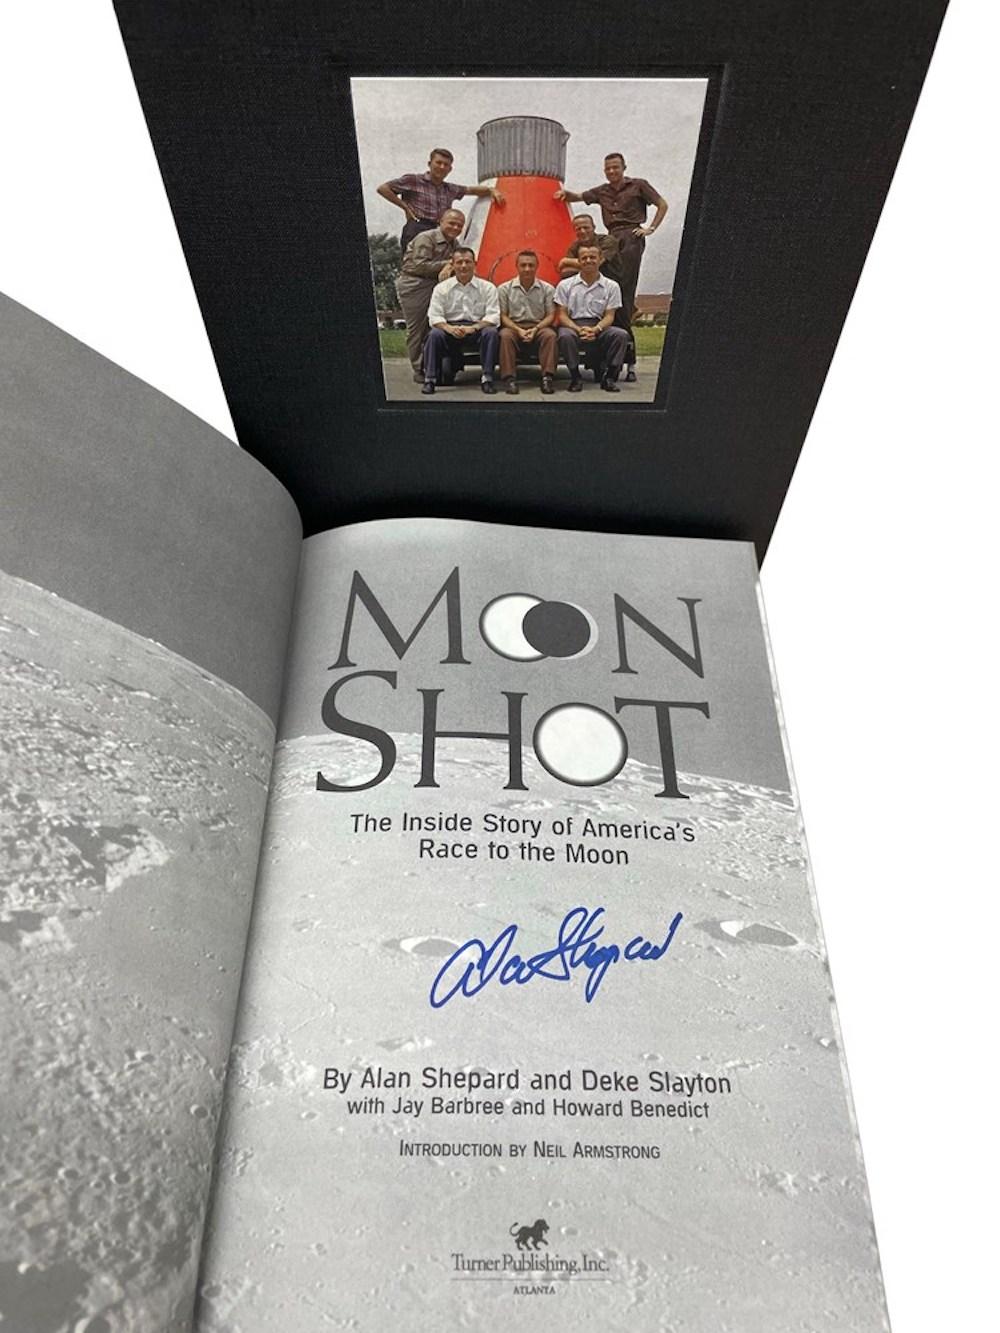 Shepard, Alan, Slayton, Deke, Moon Shot: The Inside Story of America's Race to the Moon. Atlanta: Turner Publishing, 1994. First Edition, Signed by Alan Shepard on the full title page. Introduction by Neil Armstrong. Original blue hardcover boards